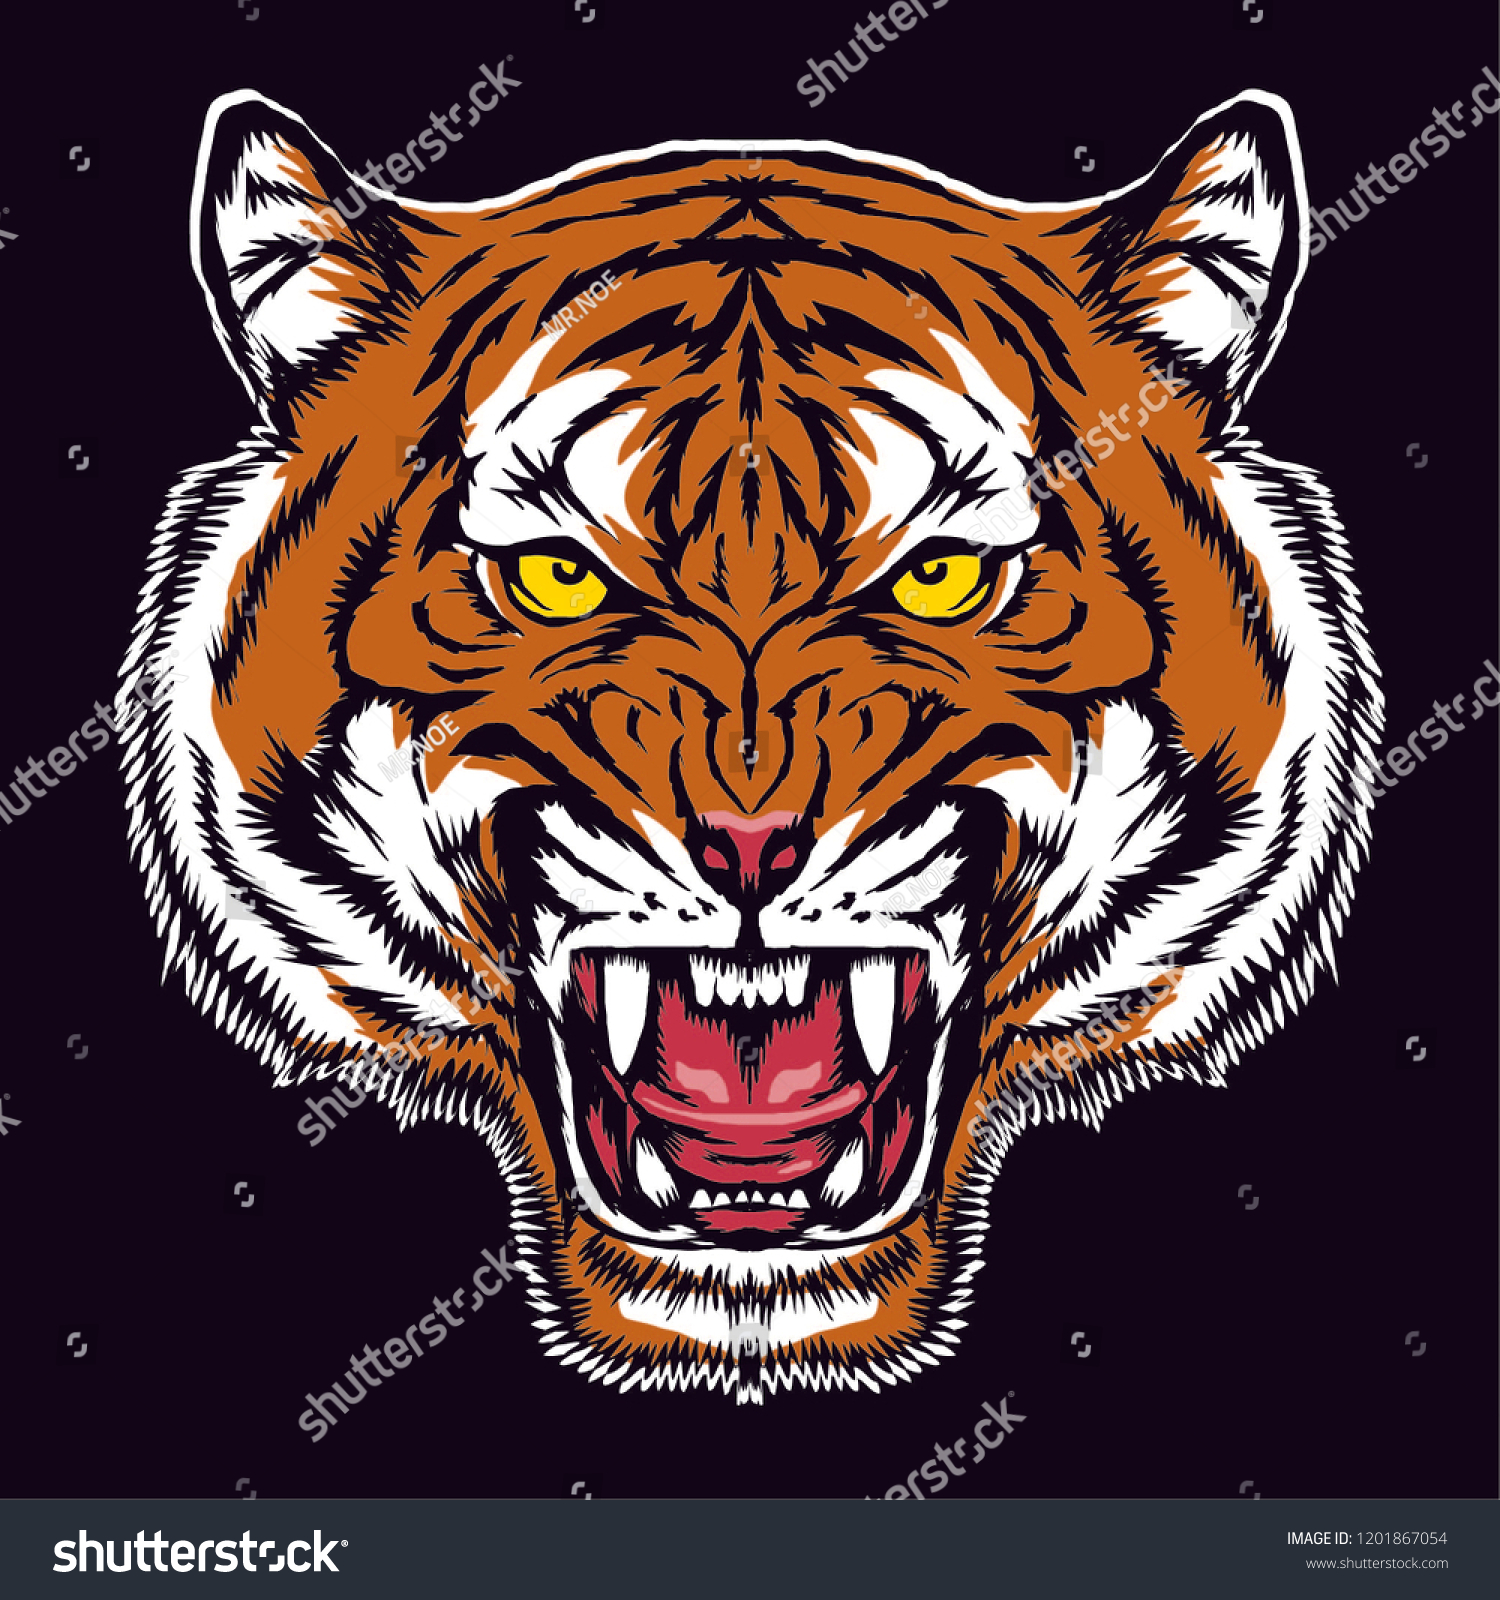 Angry Tiger Face Vector Illustration Design Royalty Free Stock Vector 1201867054 